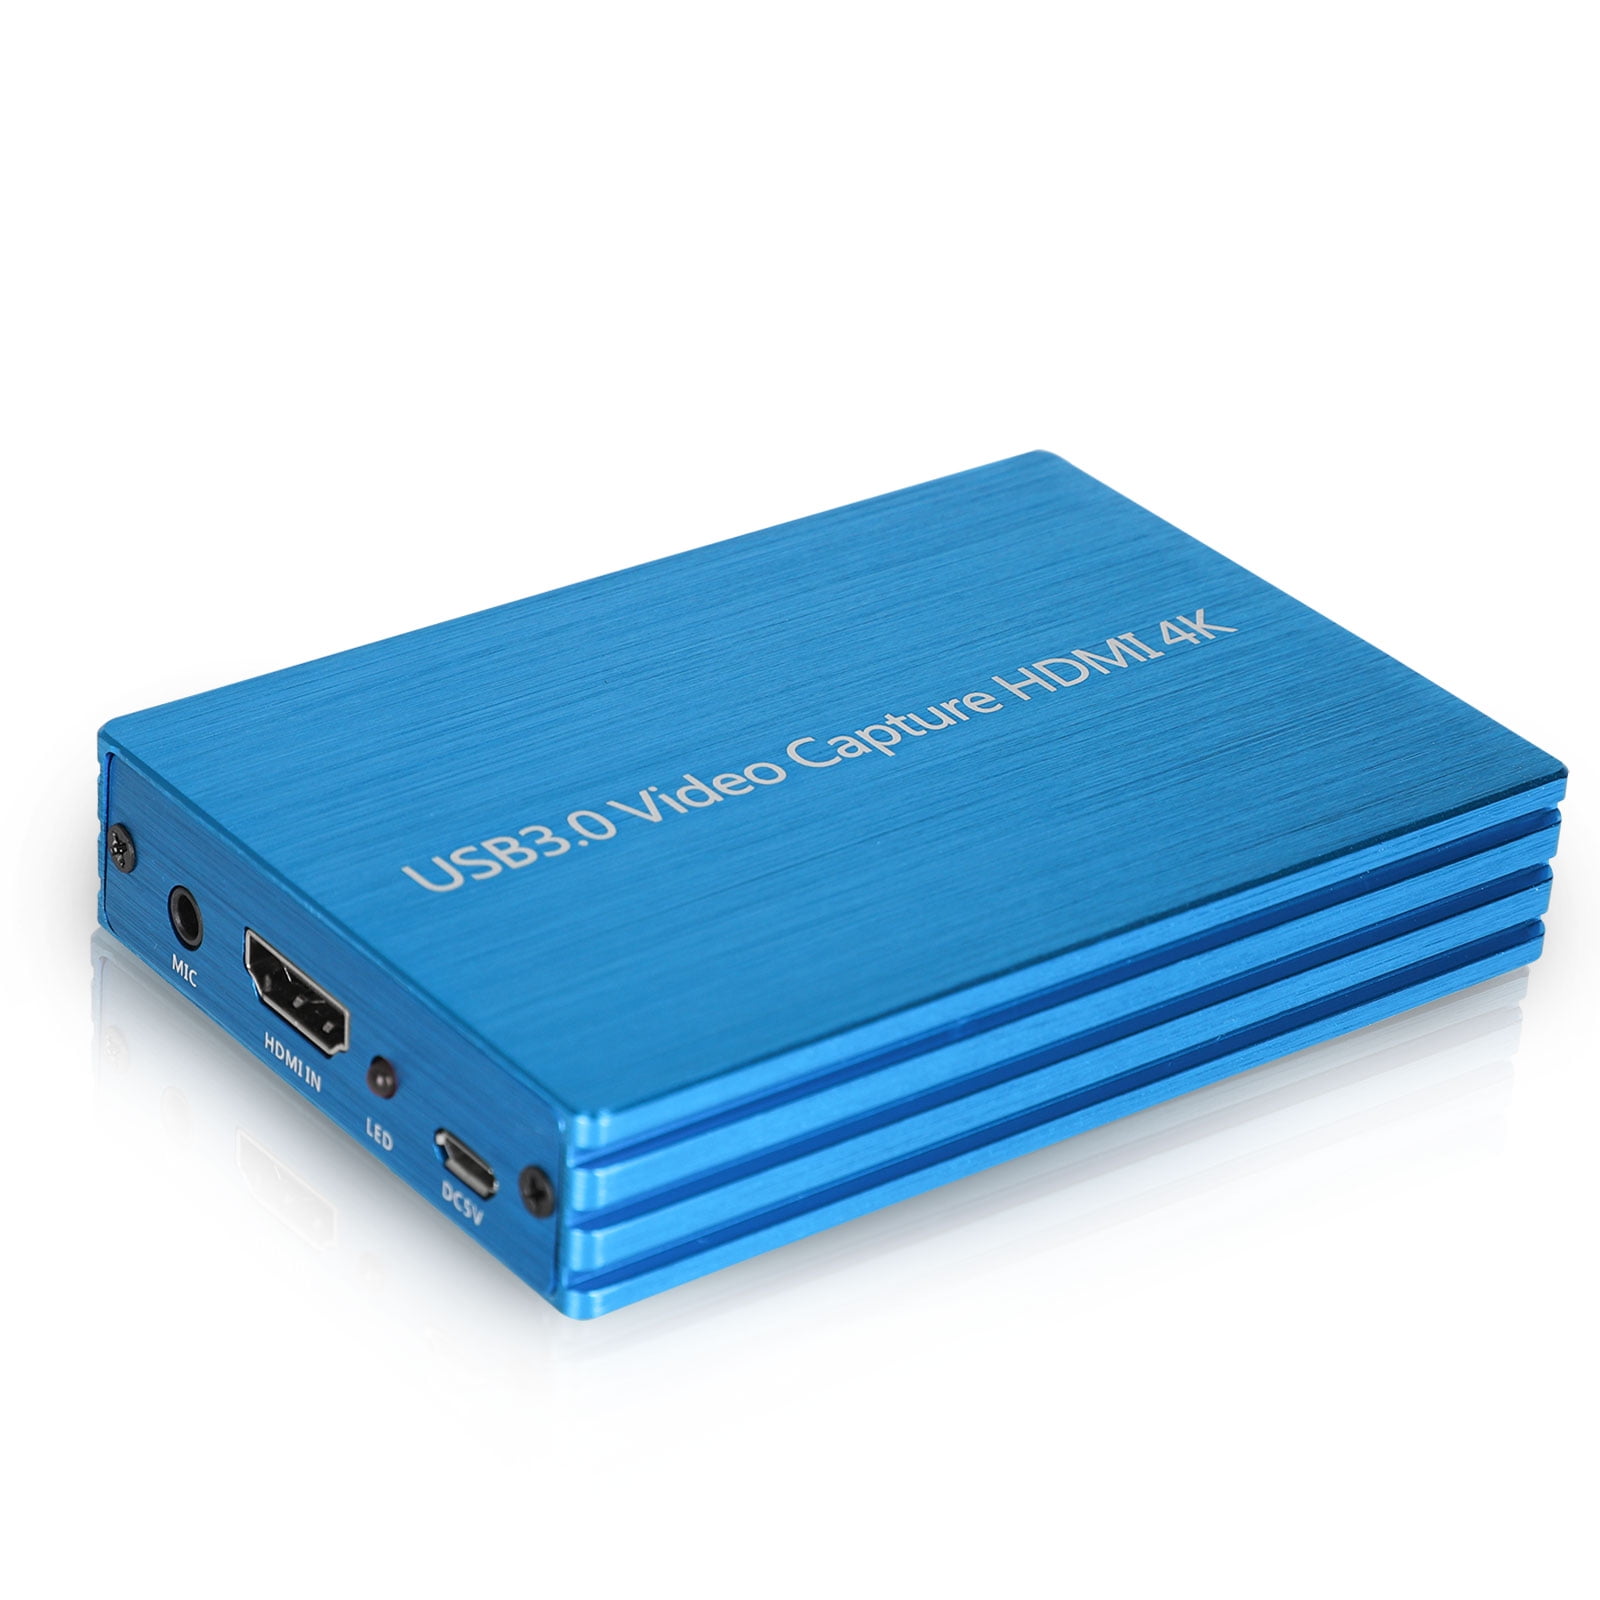 Capture Card Usb 3 0 Hdmi Game Capture Card Device With Hdmi Loop Out Support Hd Video 1080p Fits For Windows 7 8 10 Linux Youtube Obs Twitch Ps3 Ps4 Xbox Wii U Streaming